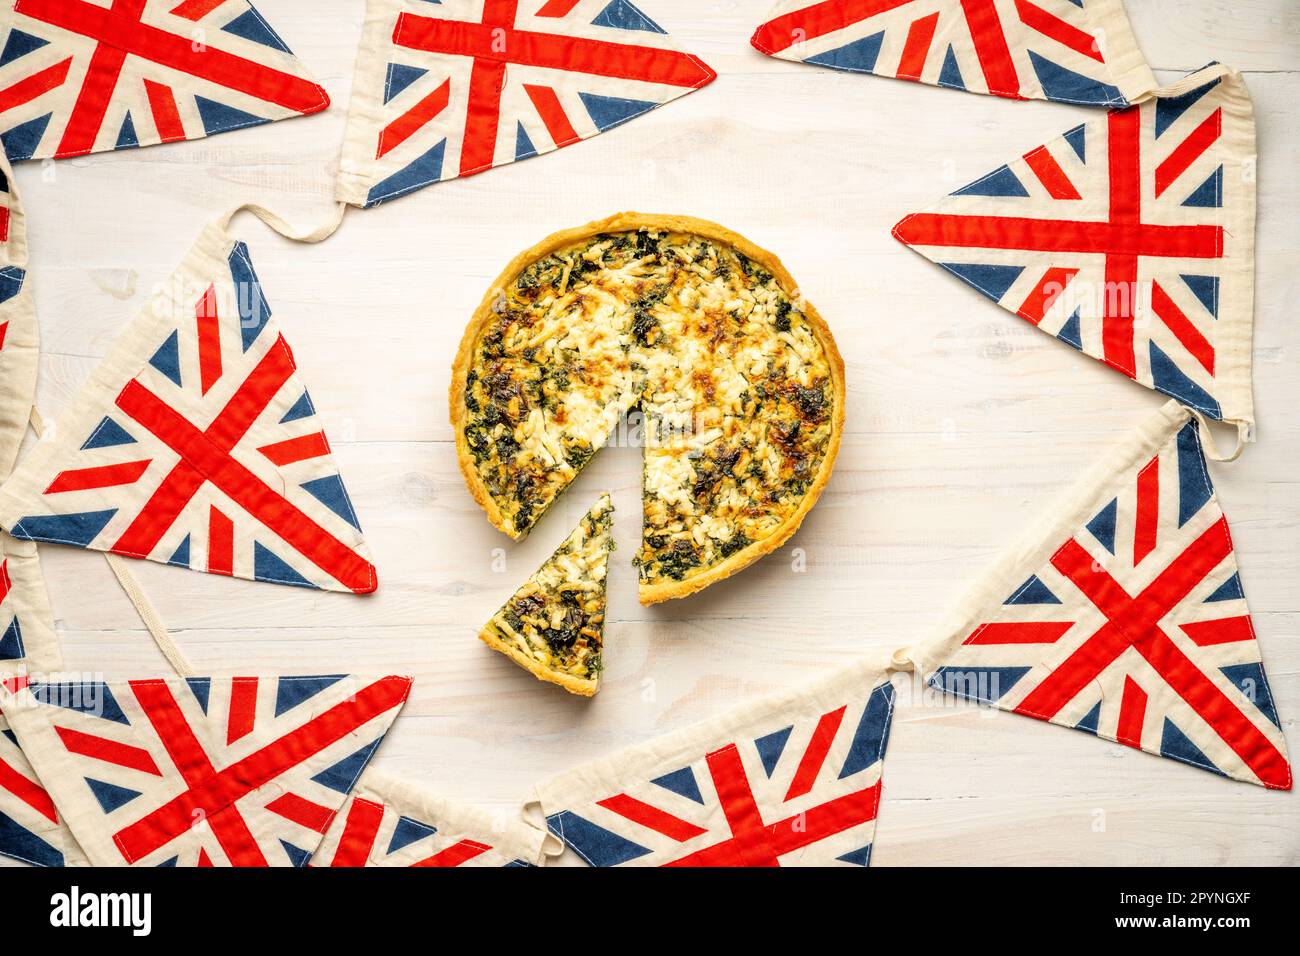 Coronation Quiche on white wooden background surrounded by Union Jack bunting. Official recipe launched for the coronation of King Charles III 2023. Stock Photo